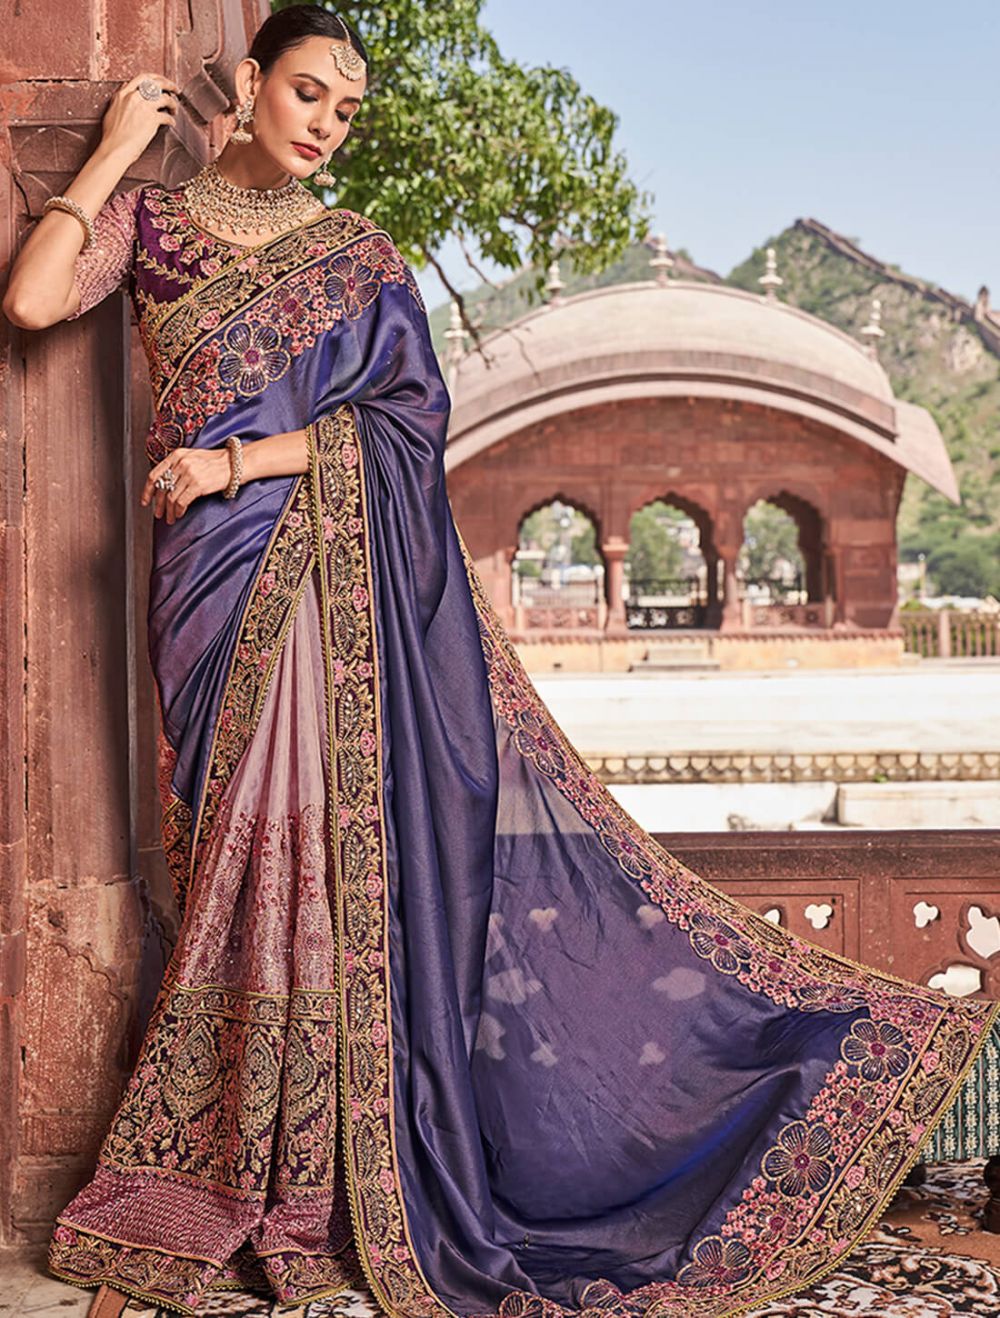 Buy Rajguru Designer Saree with fancy Blouse pic New pattern in Saree at  Amazon.in